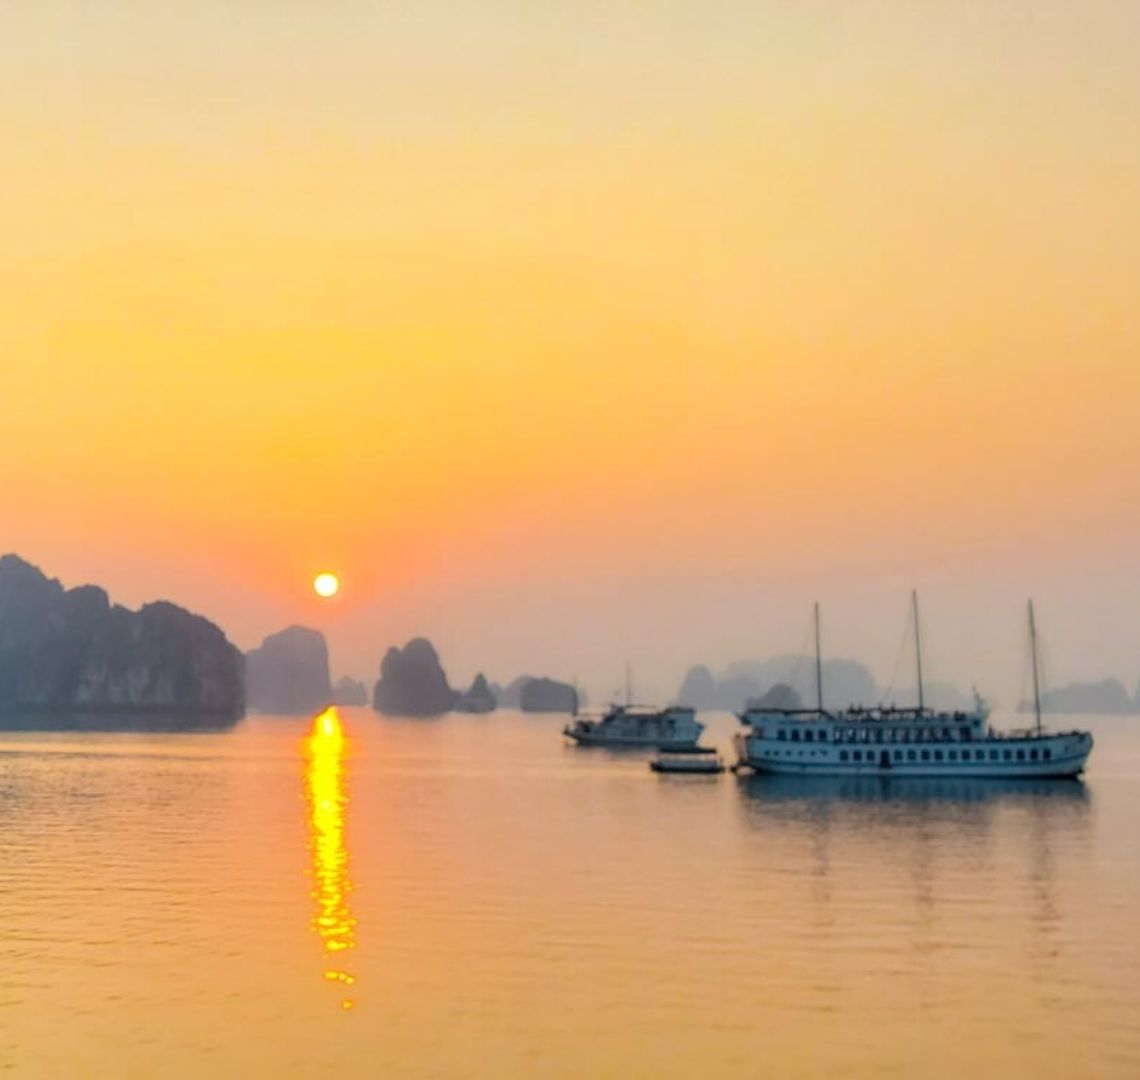 The sun is setting in Bai Tu Long in Halong Bay. There are junk ships on the still water in the foreground and shadowy limestone rocks and islands in the background. The sky is bright orange and the tiny setting sun sets off an orange stripe in its reflection in the water. 